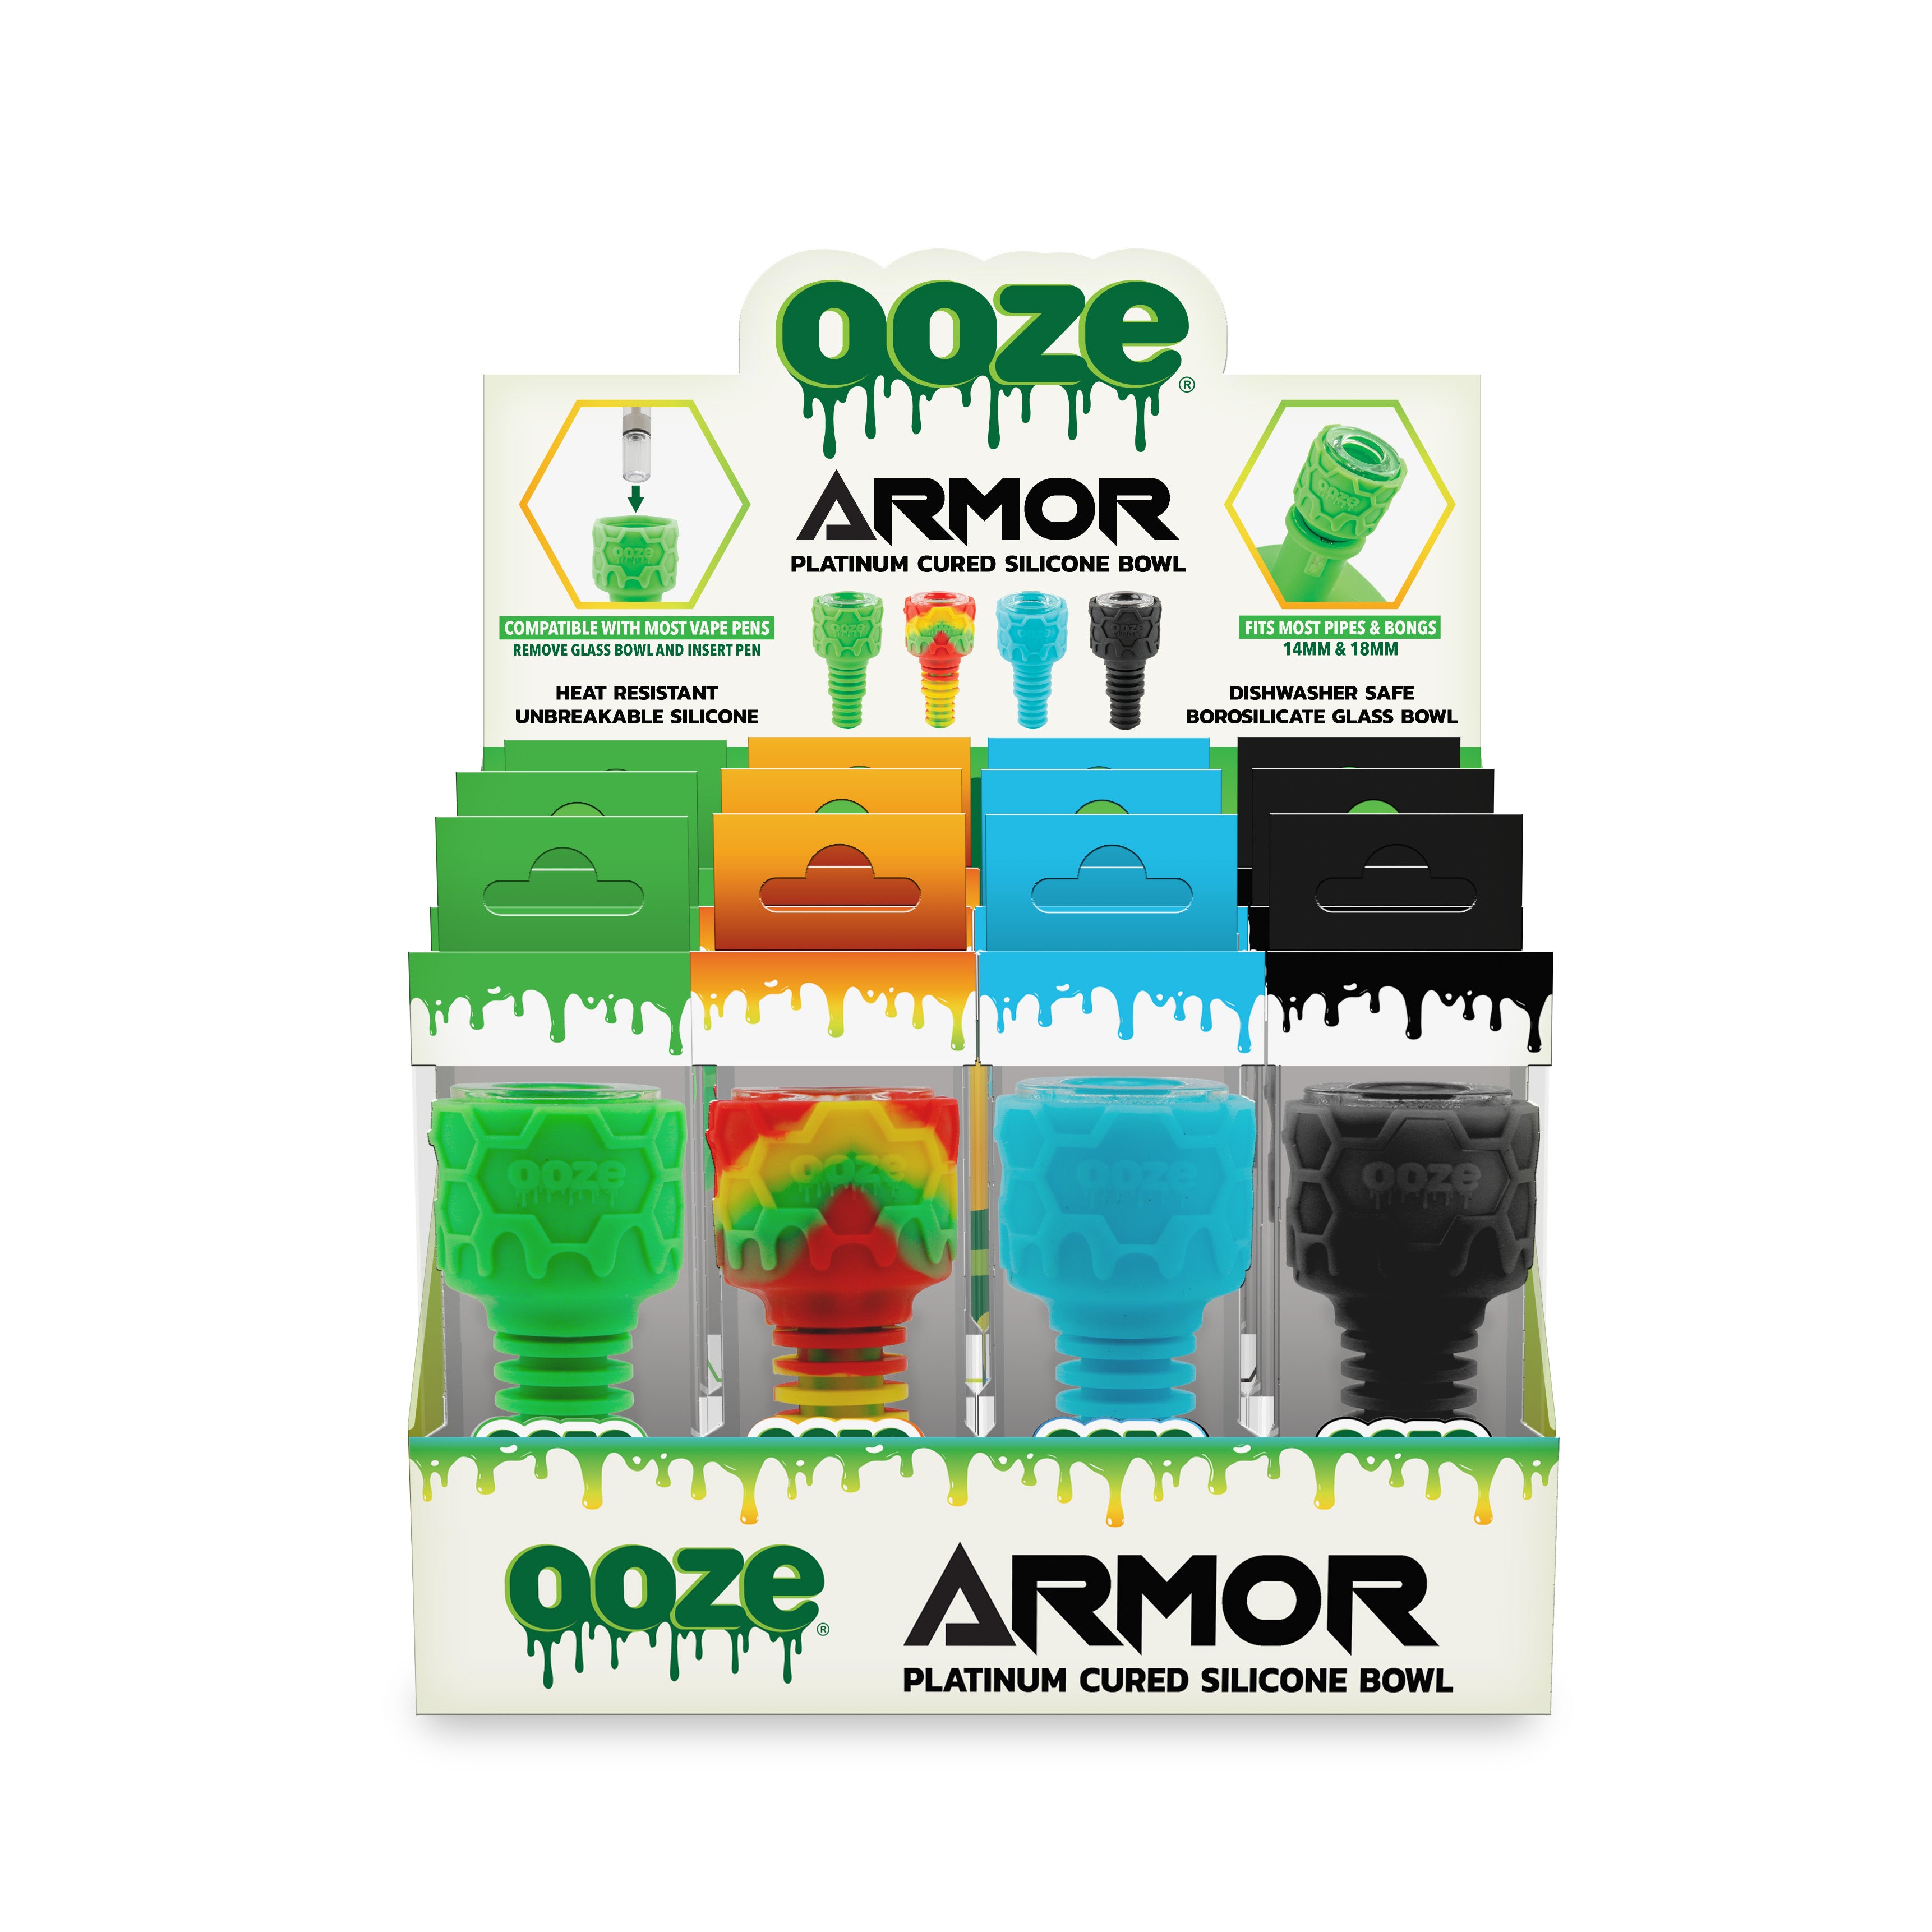 OOZE ARMOR SILICONE BOWL 12CT